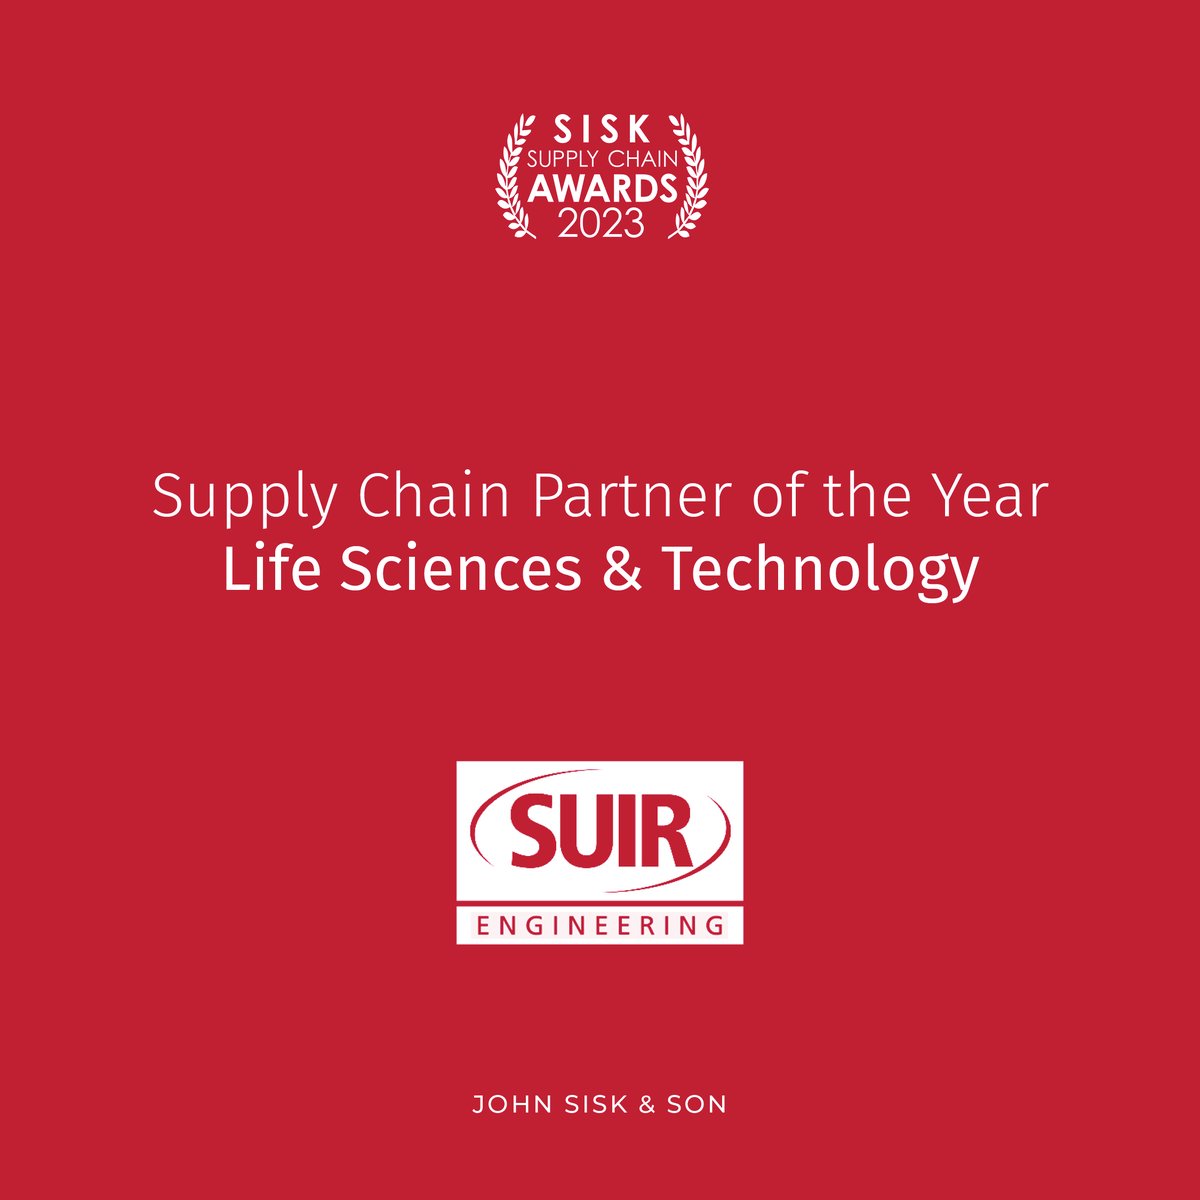 A sure thing… Suir Engineering are our winners in the ‘Supply Chain Partner of the Year – Life Sciences & Technology’ category. Well done to all the Suir Engineering team! #BuiltBySisk